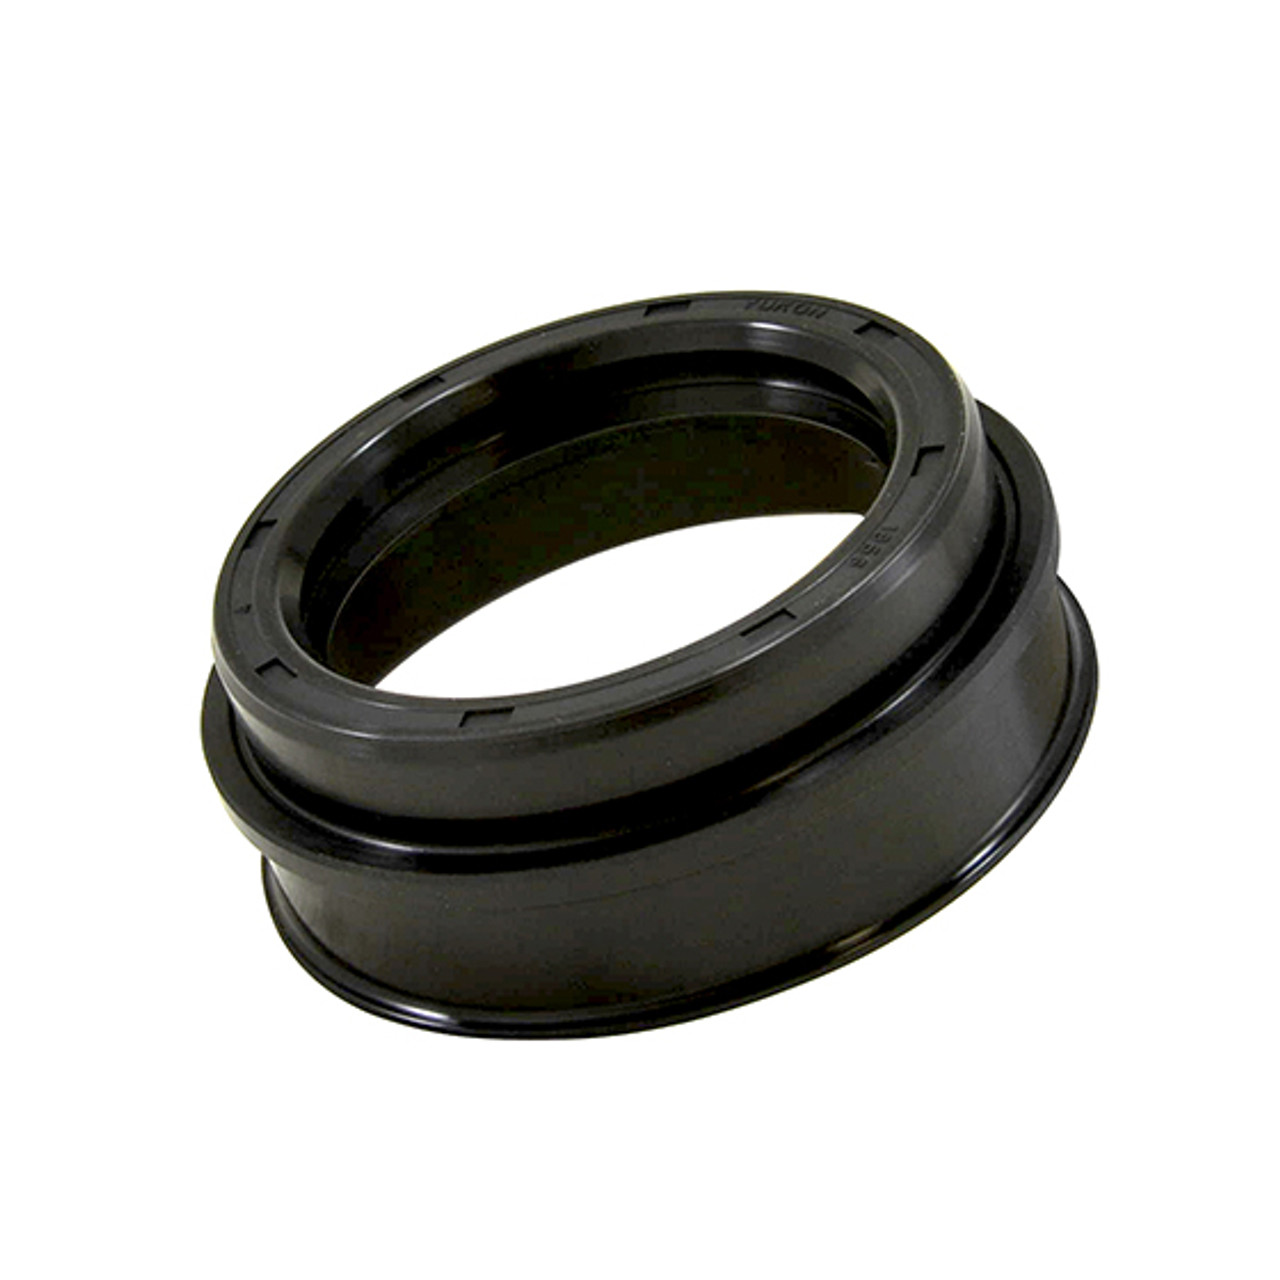 Outer axle seal for Toyota 7.5", 8" & V6 rear